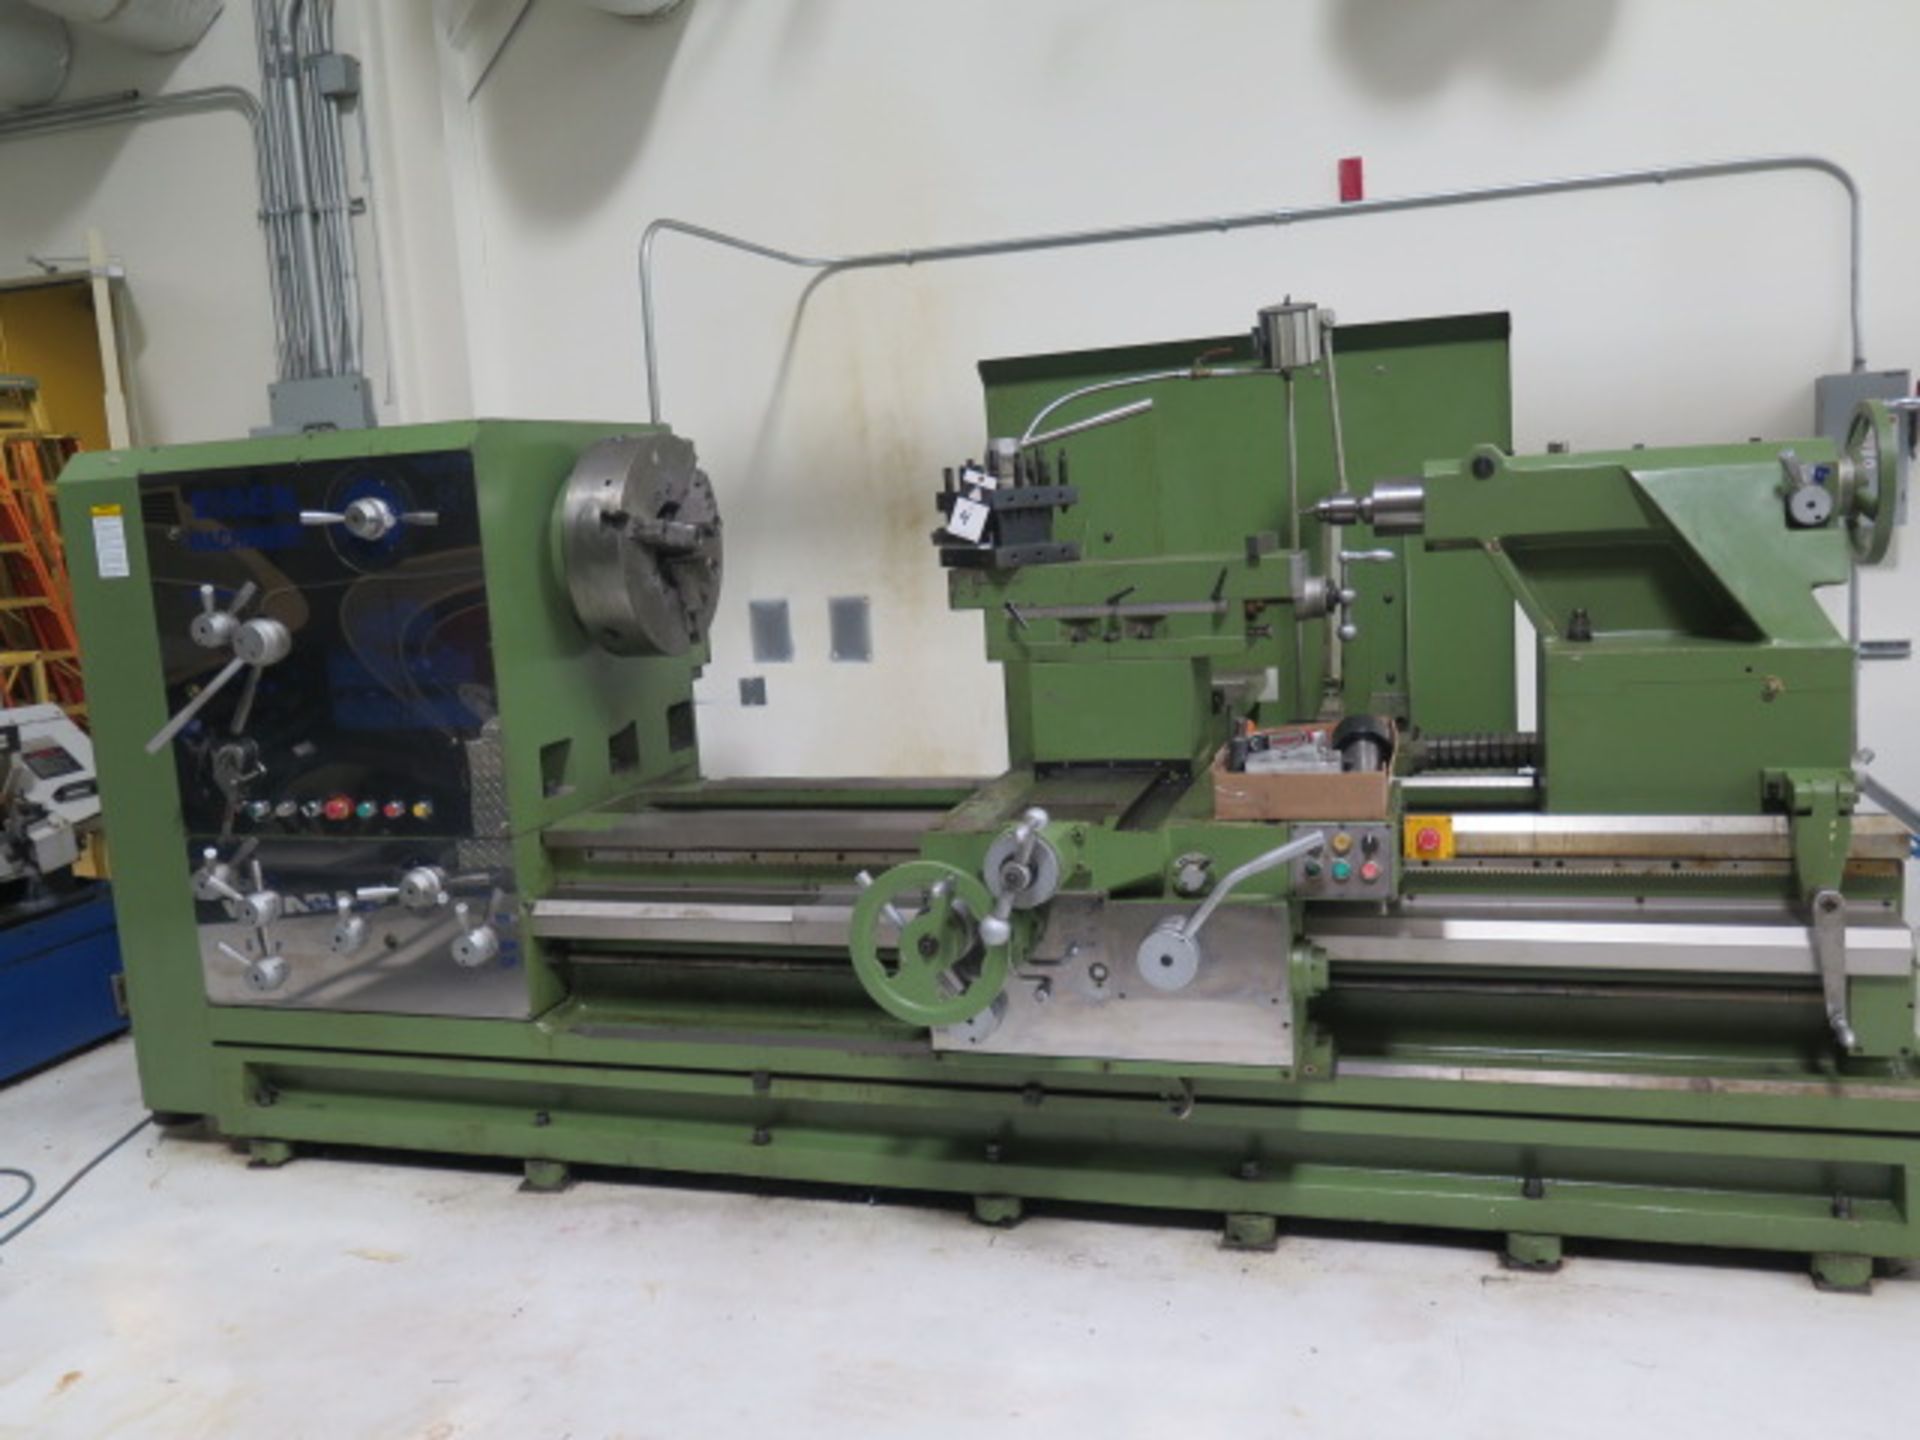 2008 Eisen PS-4560 45” x 60” Geared Head Lathe s/n 08120678 w/ 6” Thru Spindle Bore, 7-700 RPM, - Image 2 of 16